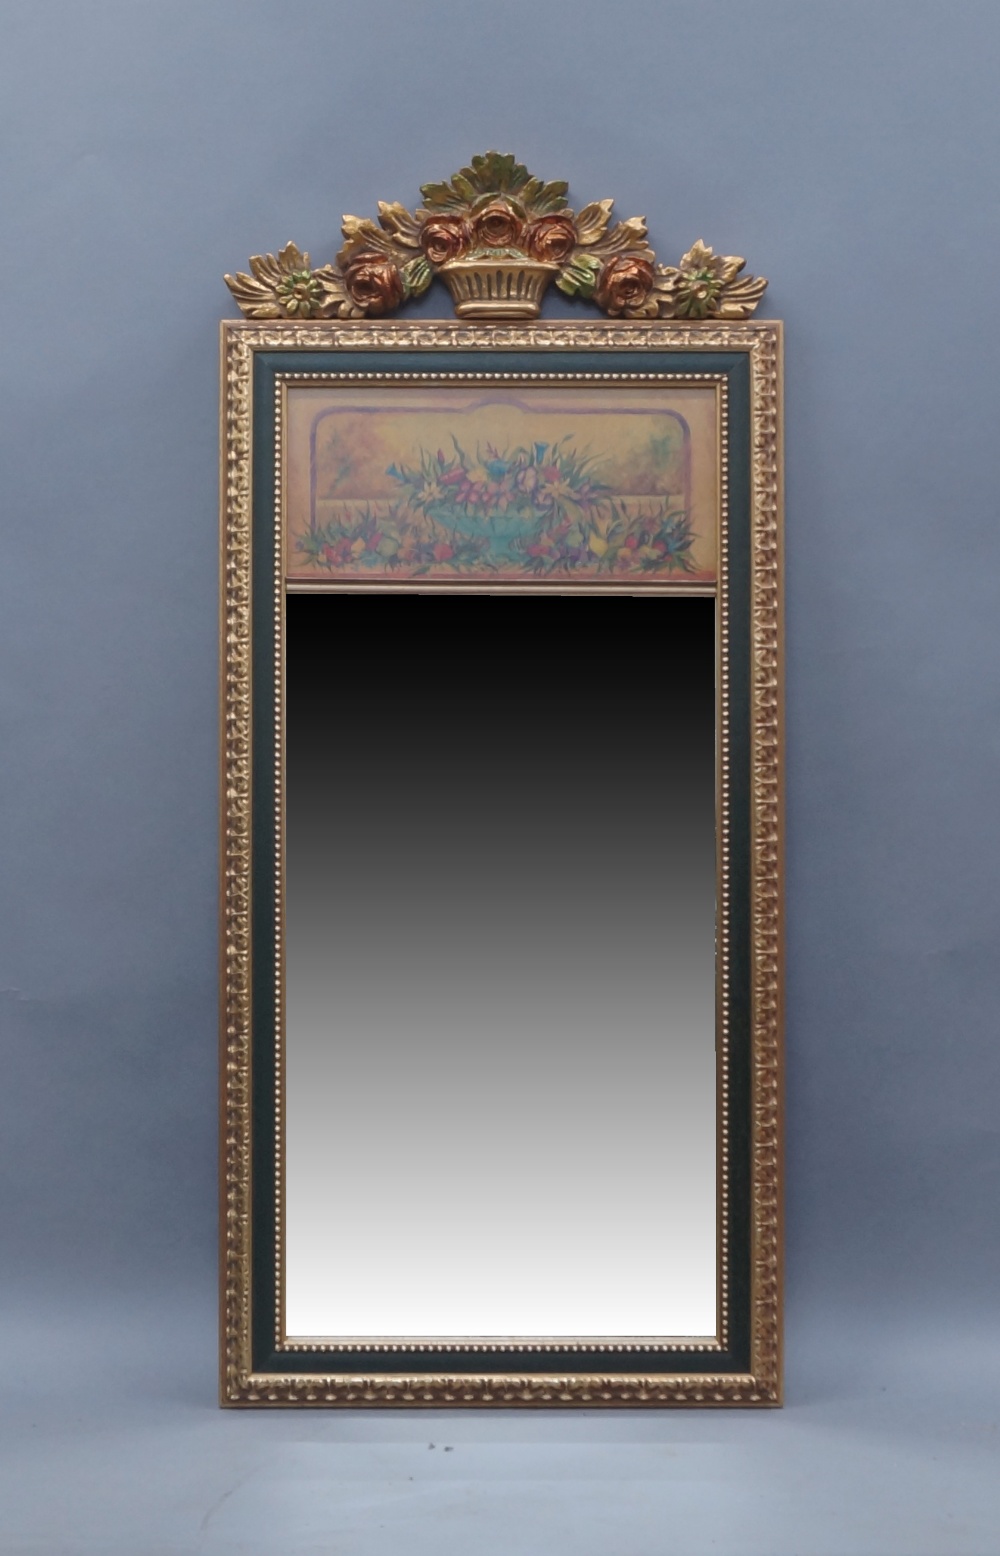 An 18th century style gilt chimney mirror, early 21st century, moulded floral crest above printed